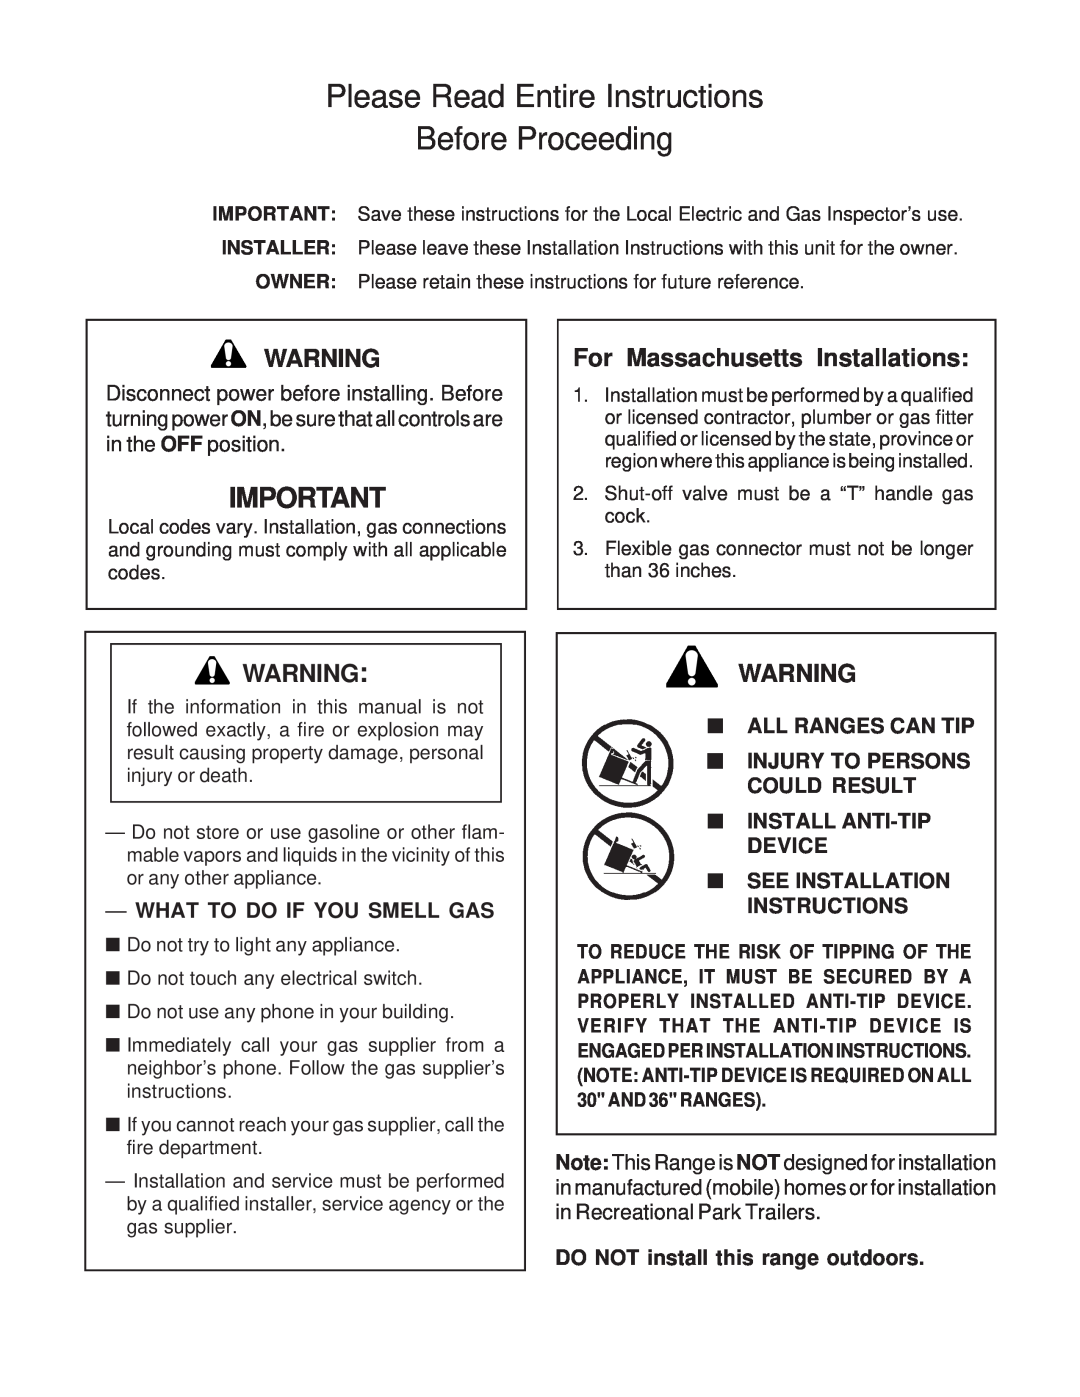 Thermador PD30 Please Read Entire Instructions Before Proceeding, For Massachusetts Installations, Install Anti-Tipdevice 